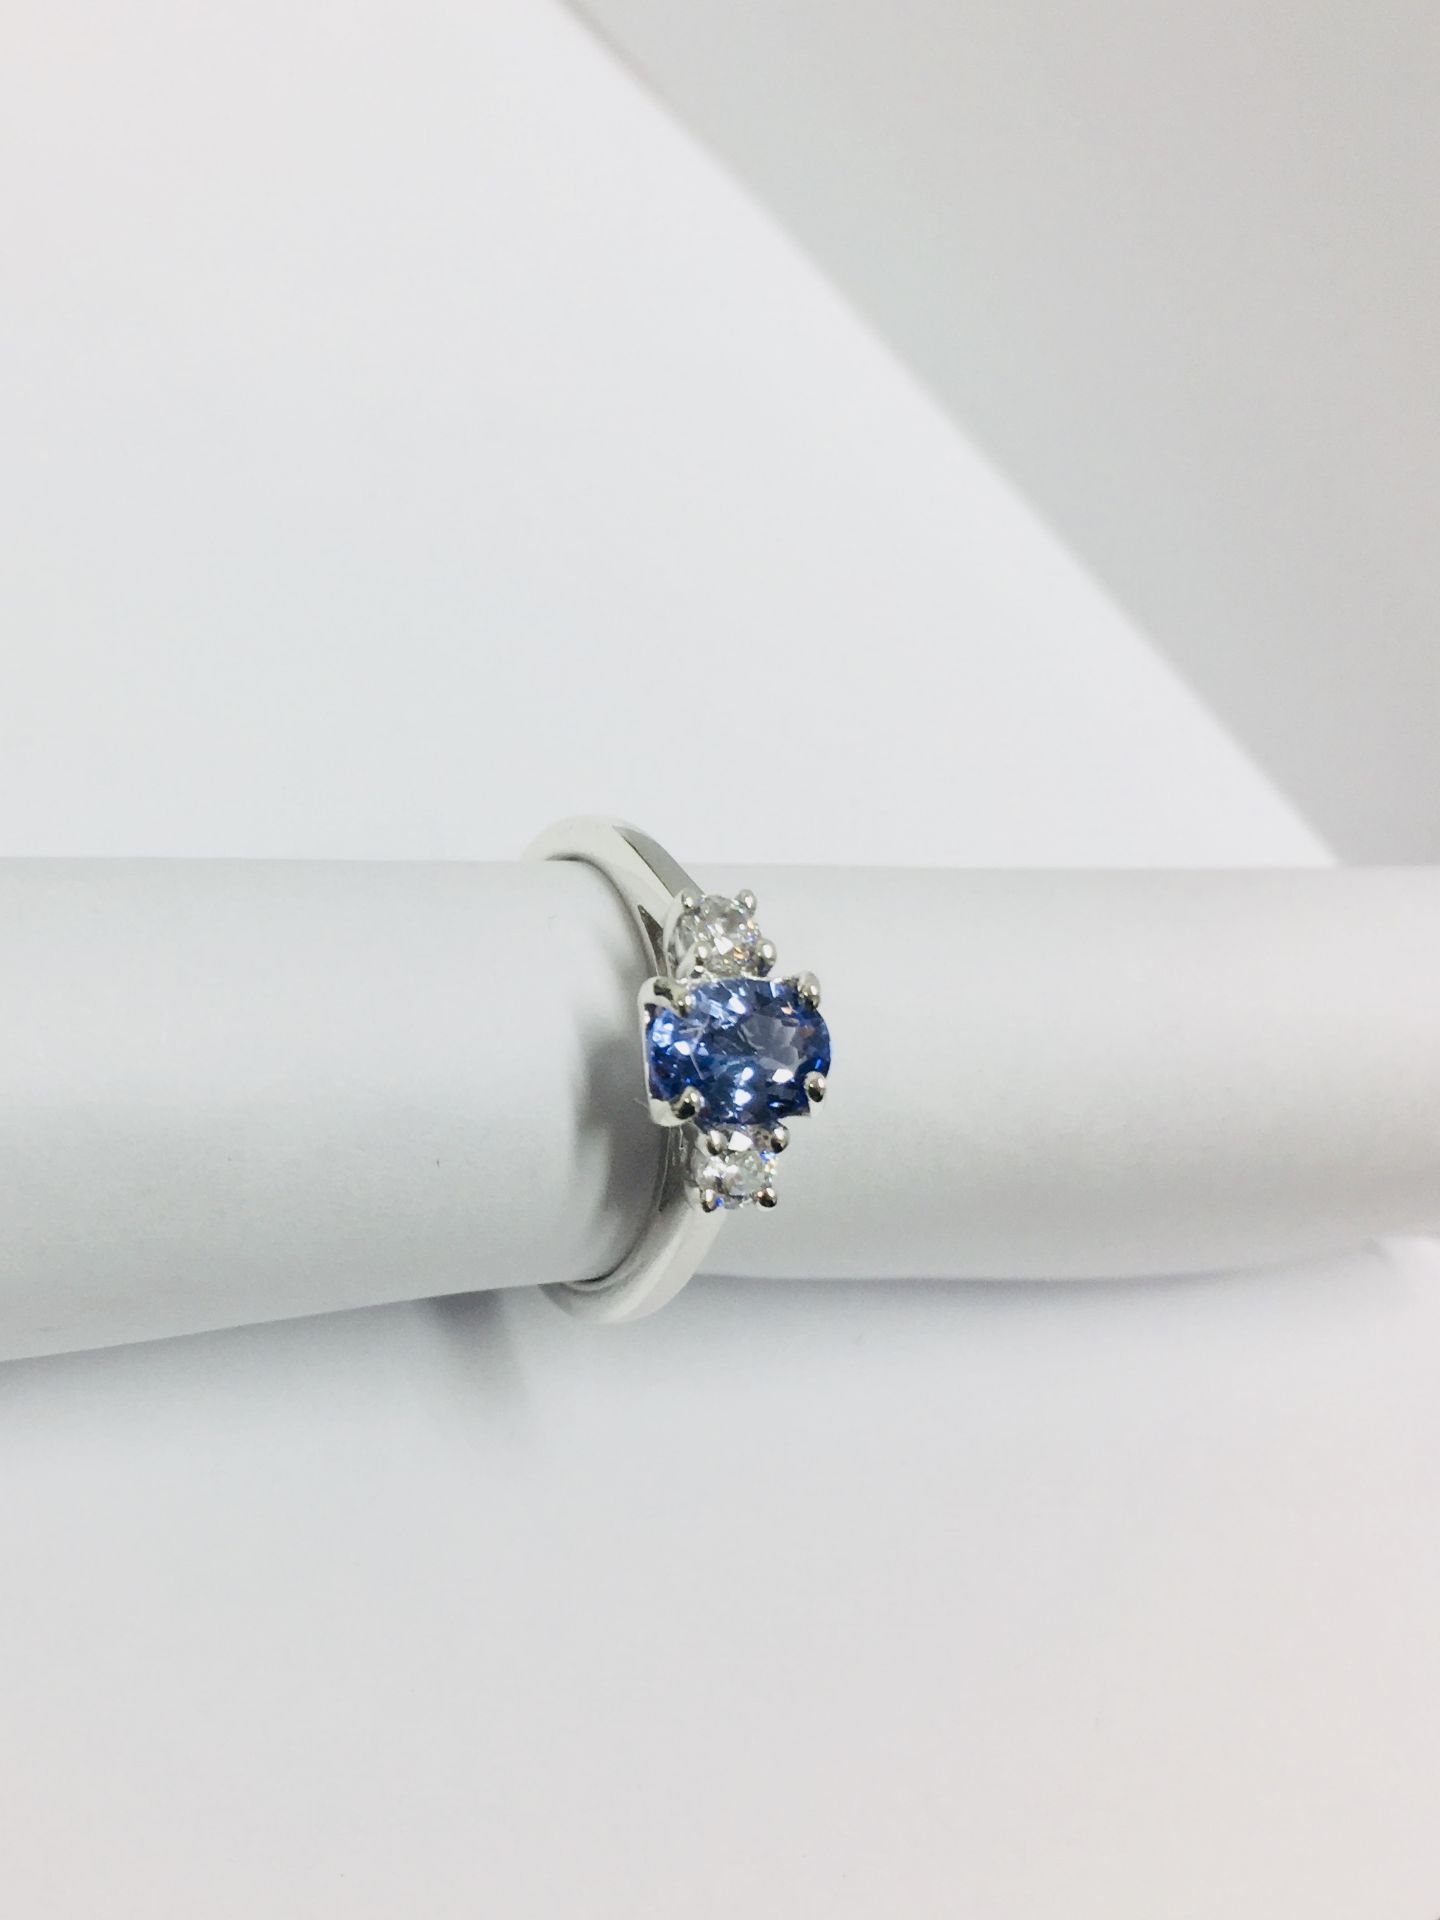 Tanzanite and diamond trilogy ring. 1ct, 7 x 5mm oval tanzanite ( treated ) with a brilliant cut - Image 5 of 7